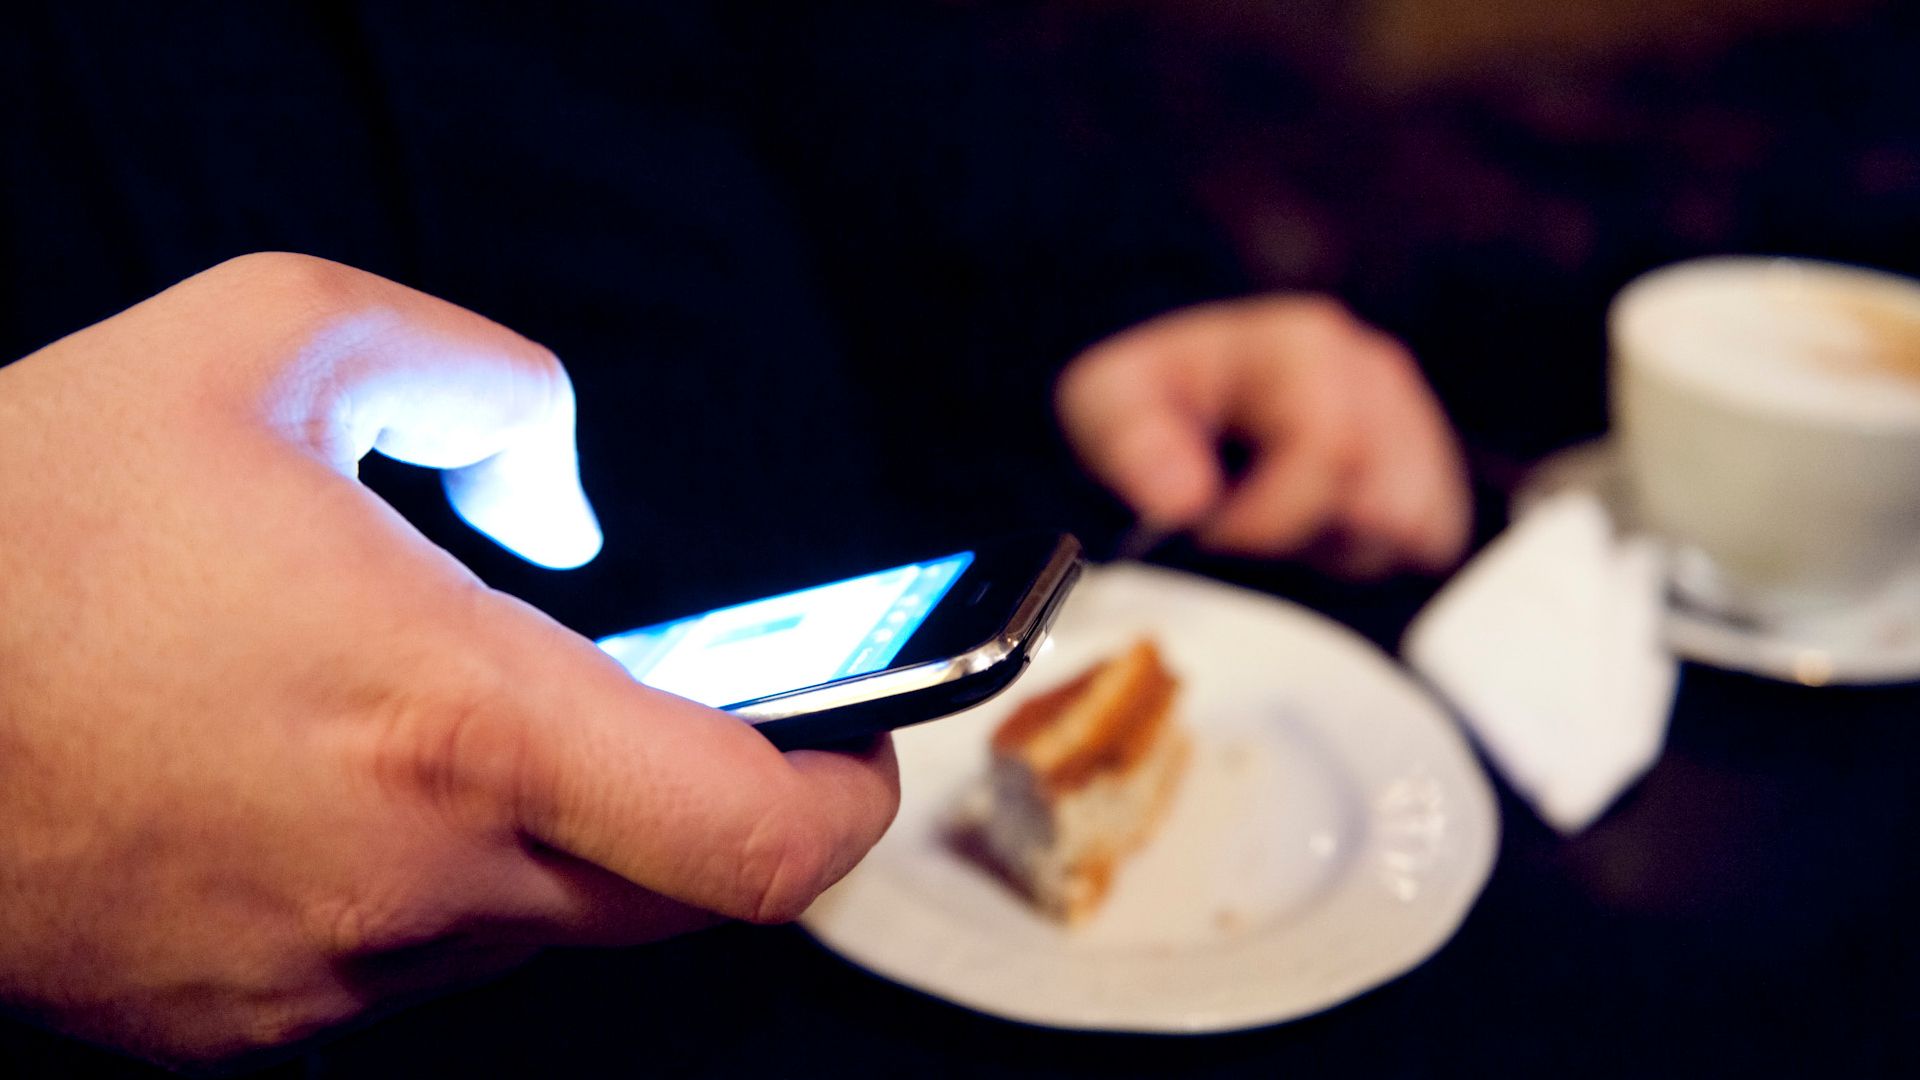 A hand with a cell phone in front of a cake plate